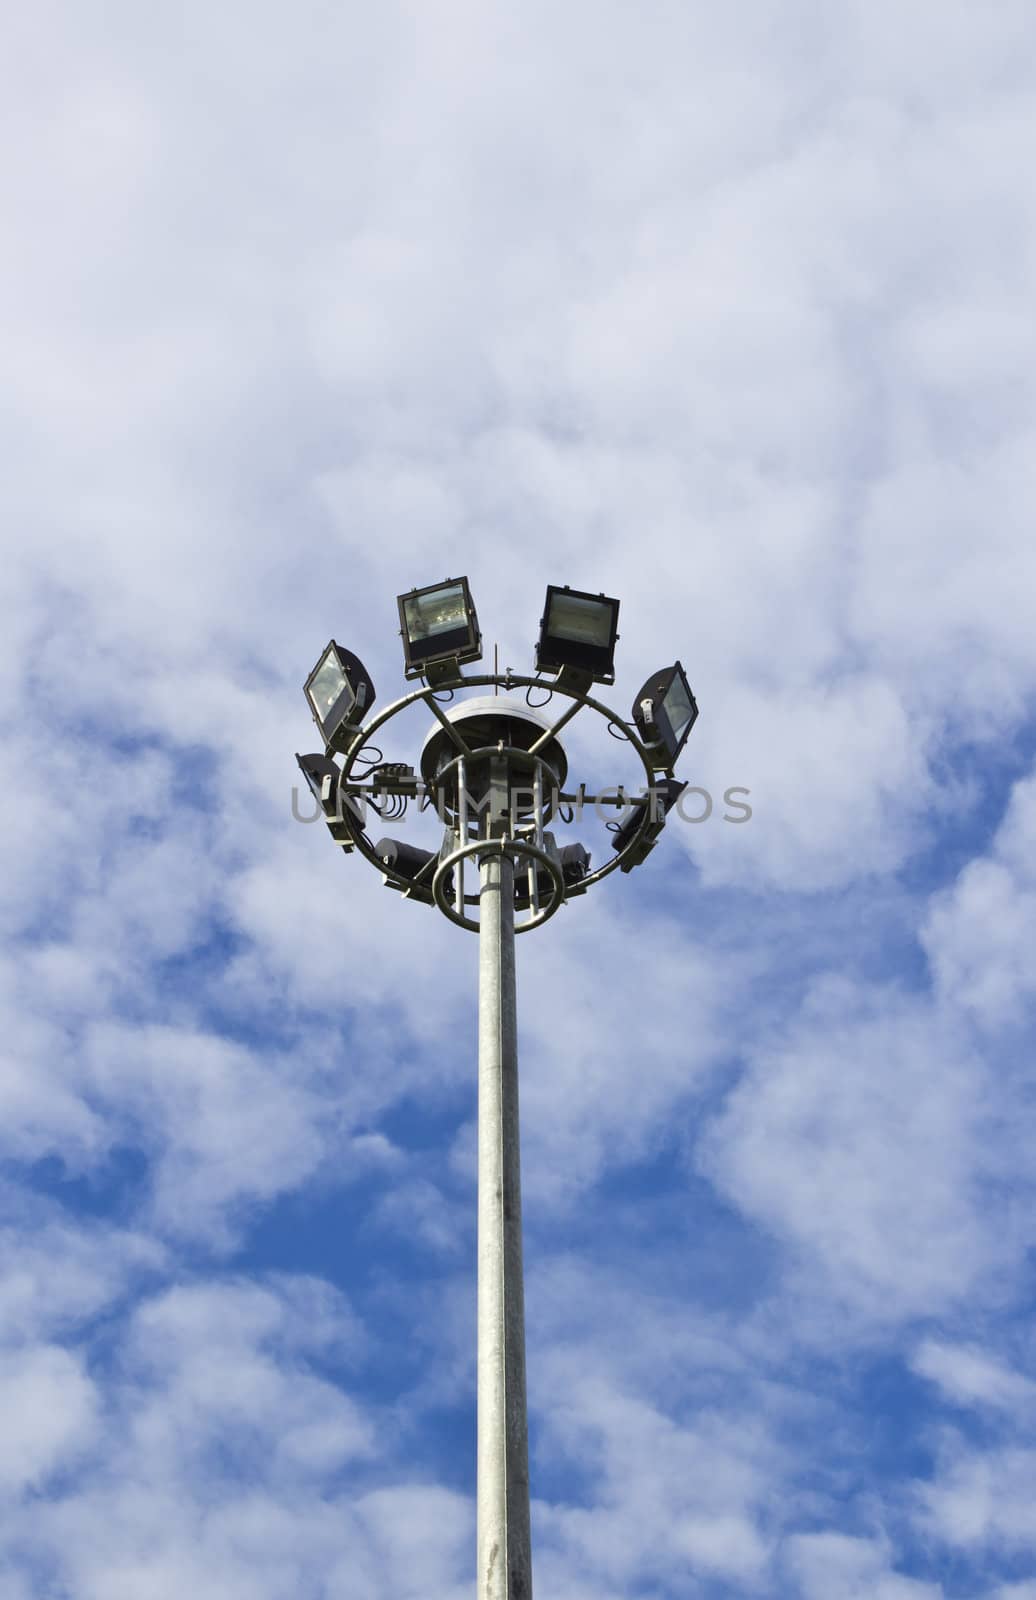 Spot-light tower in blue sky with cloud